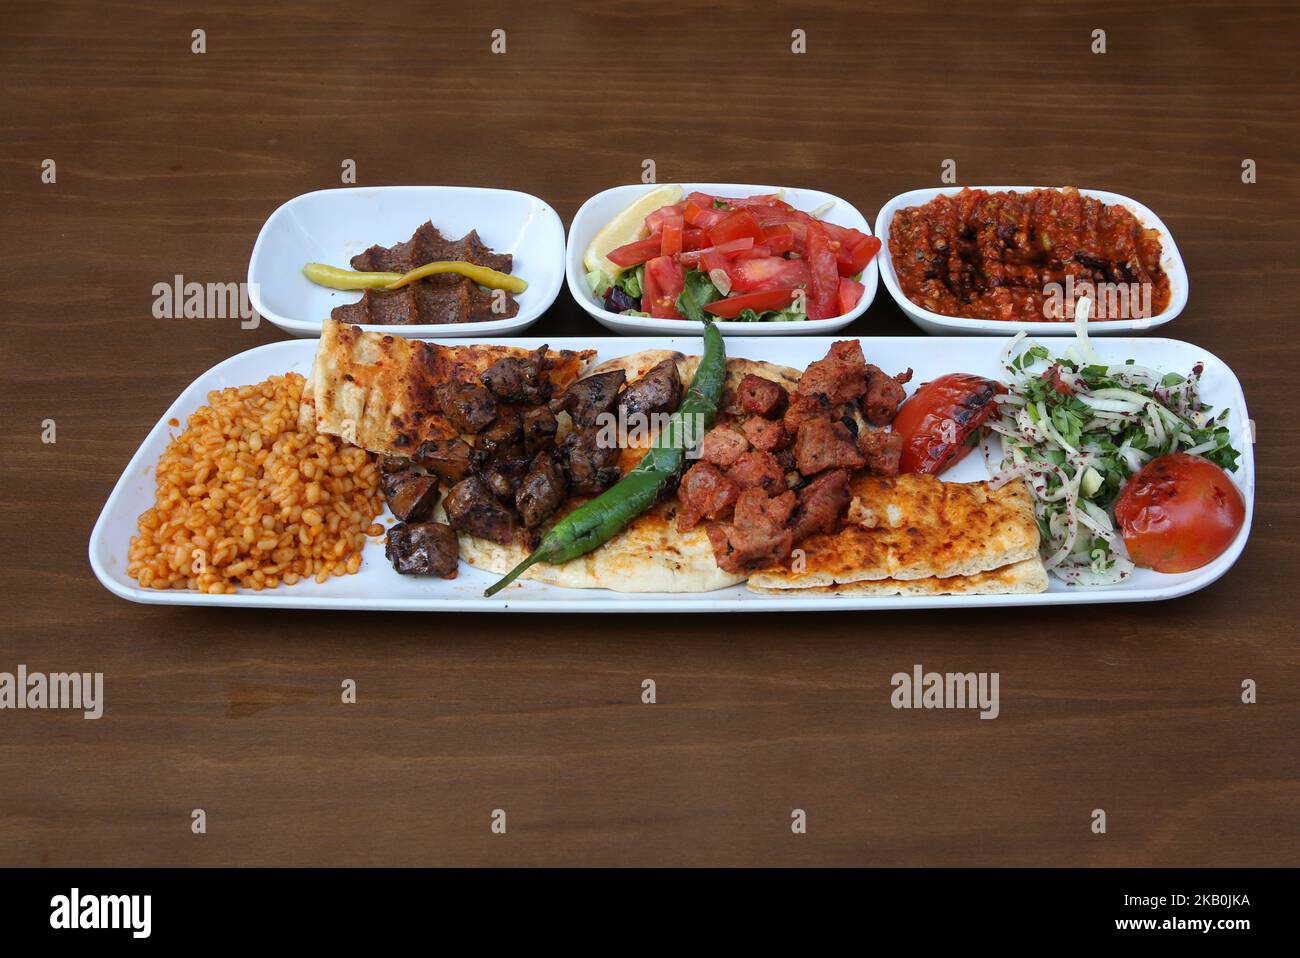 Liver kebab and lamb shish kebab are on the plate, accompanied by salad, spicy paste and raw meatballs Stock Photo